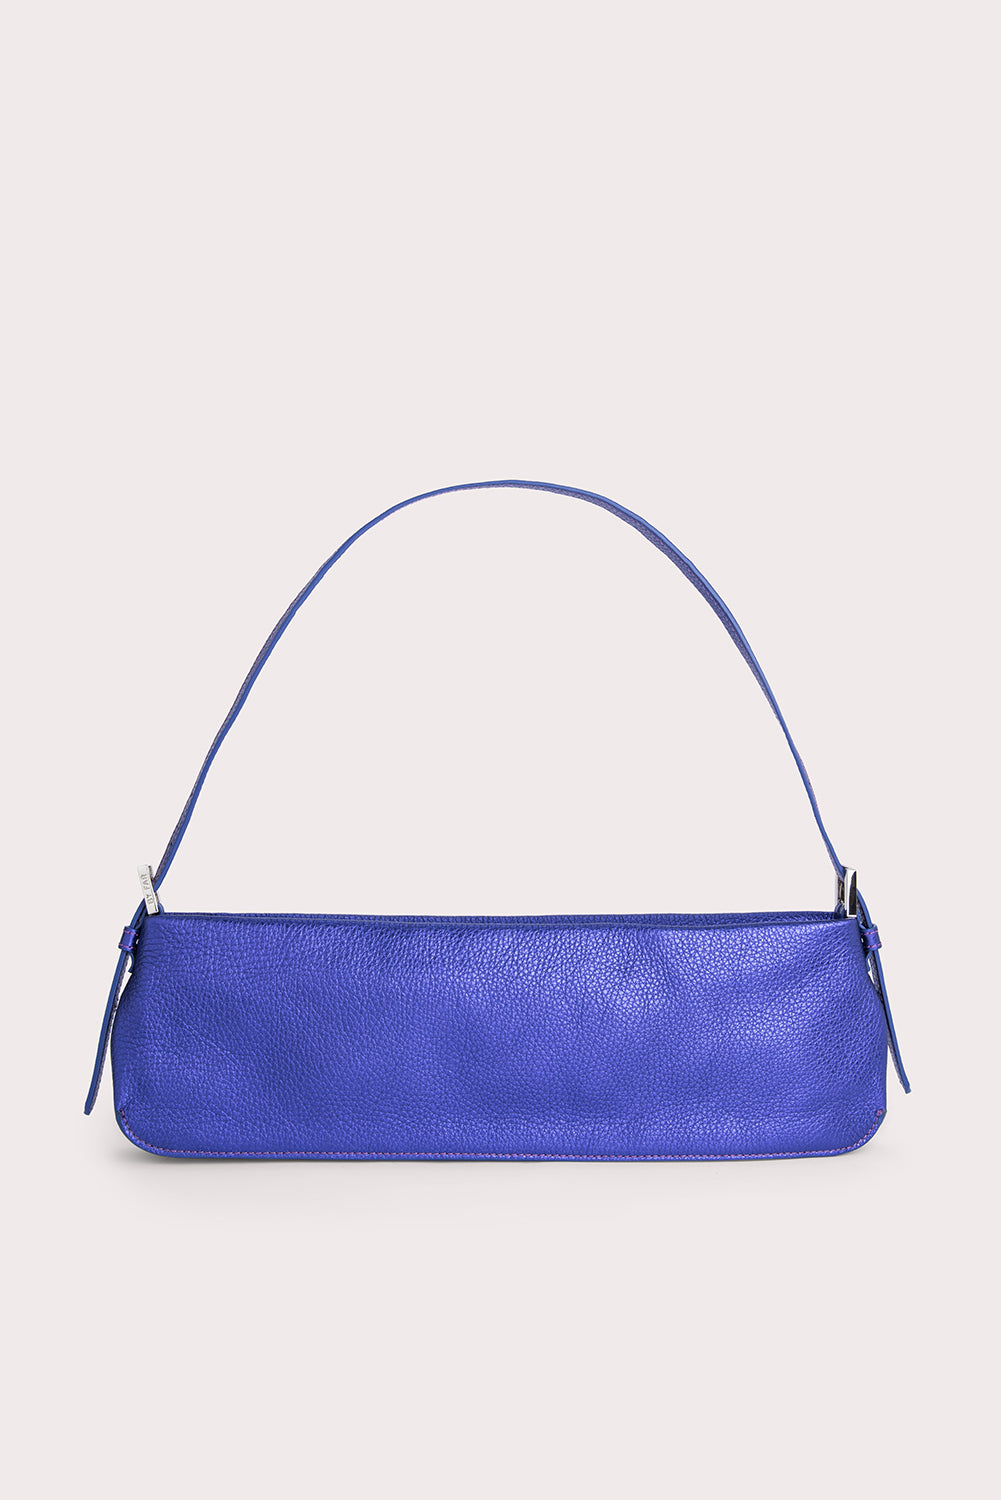 BY FARのDulce Long Ultraviolet Metallic Grain Leather